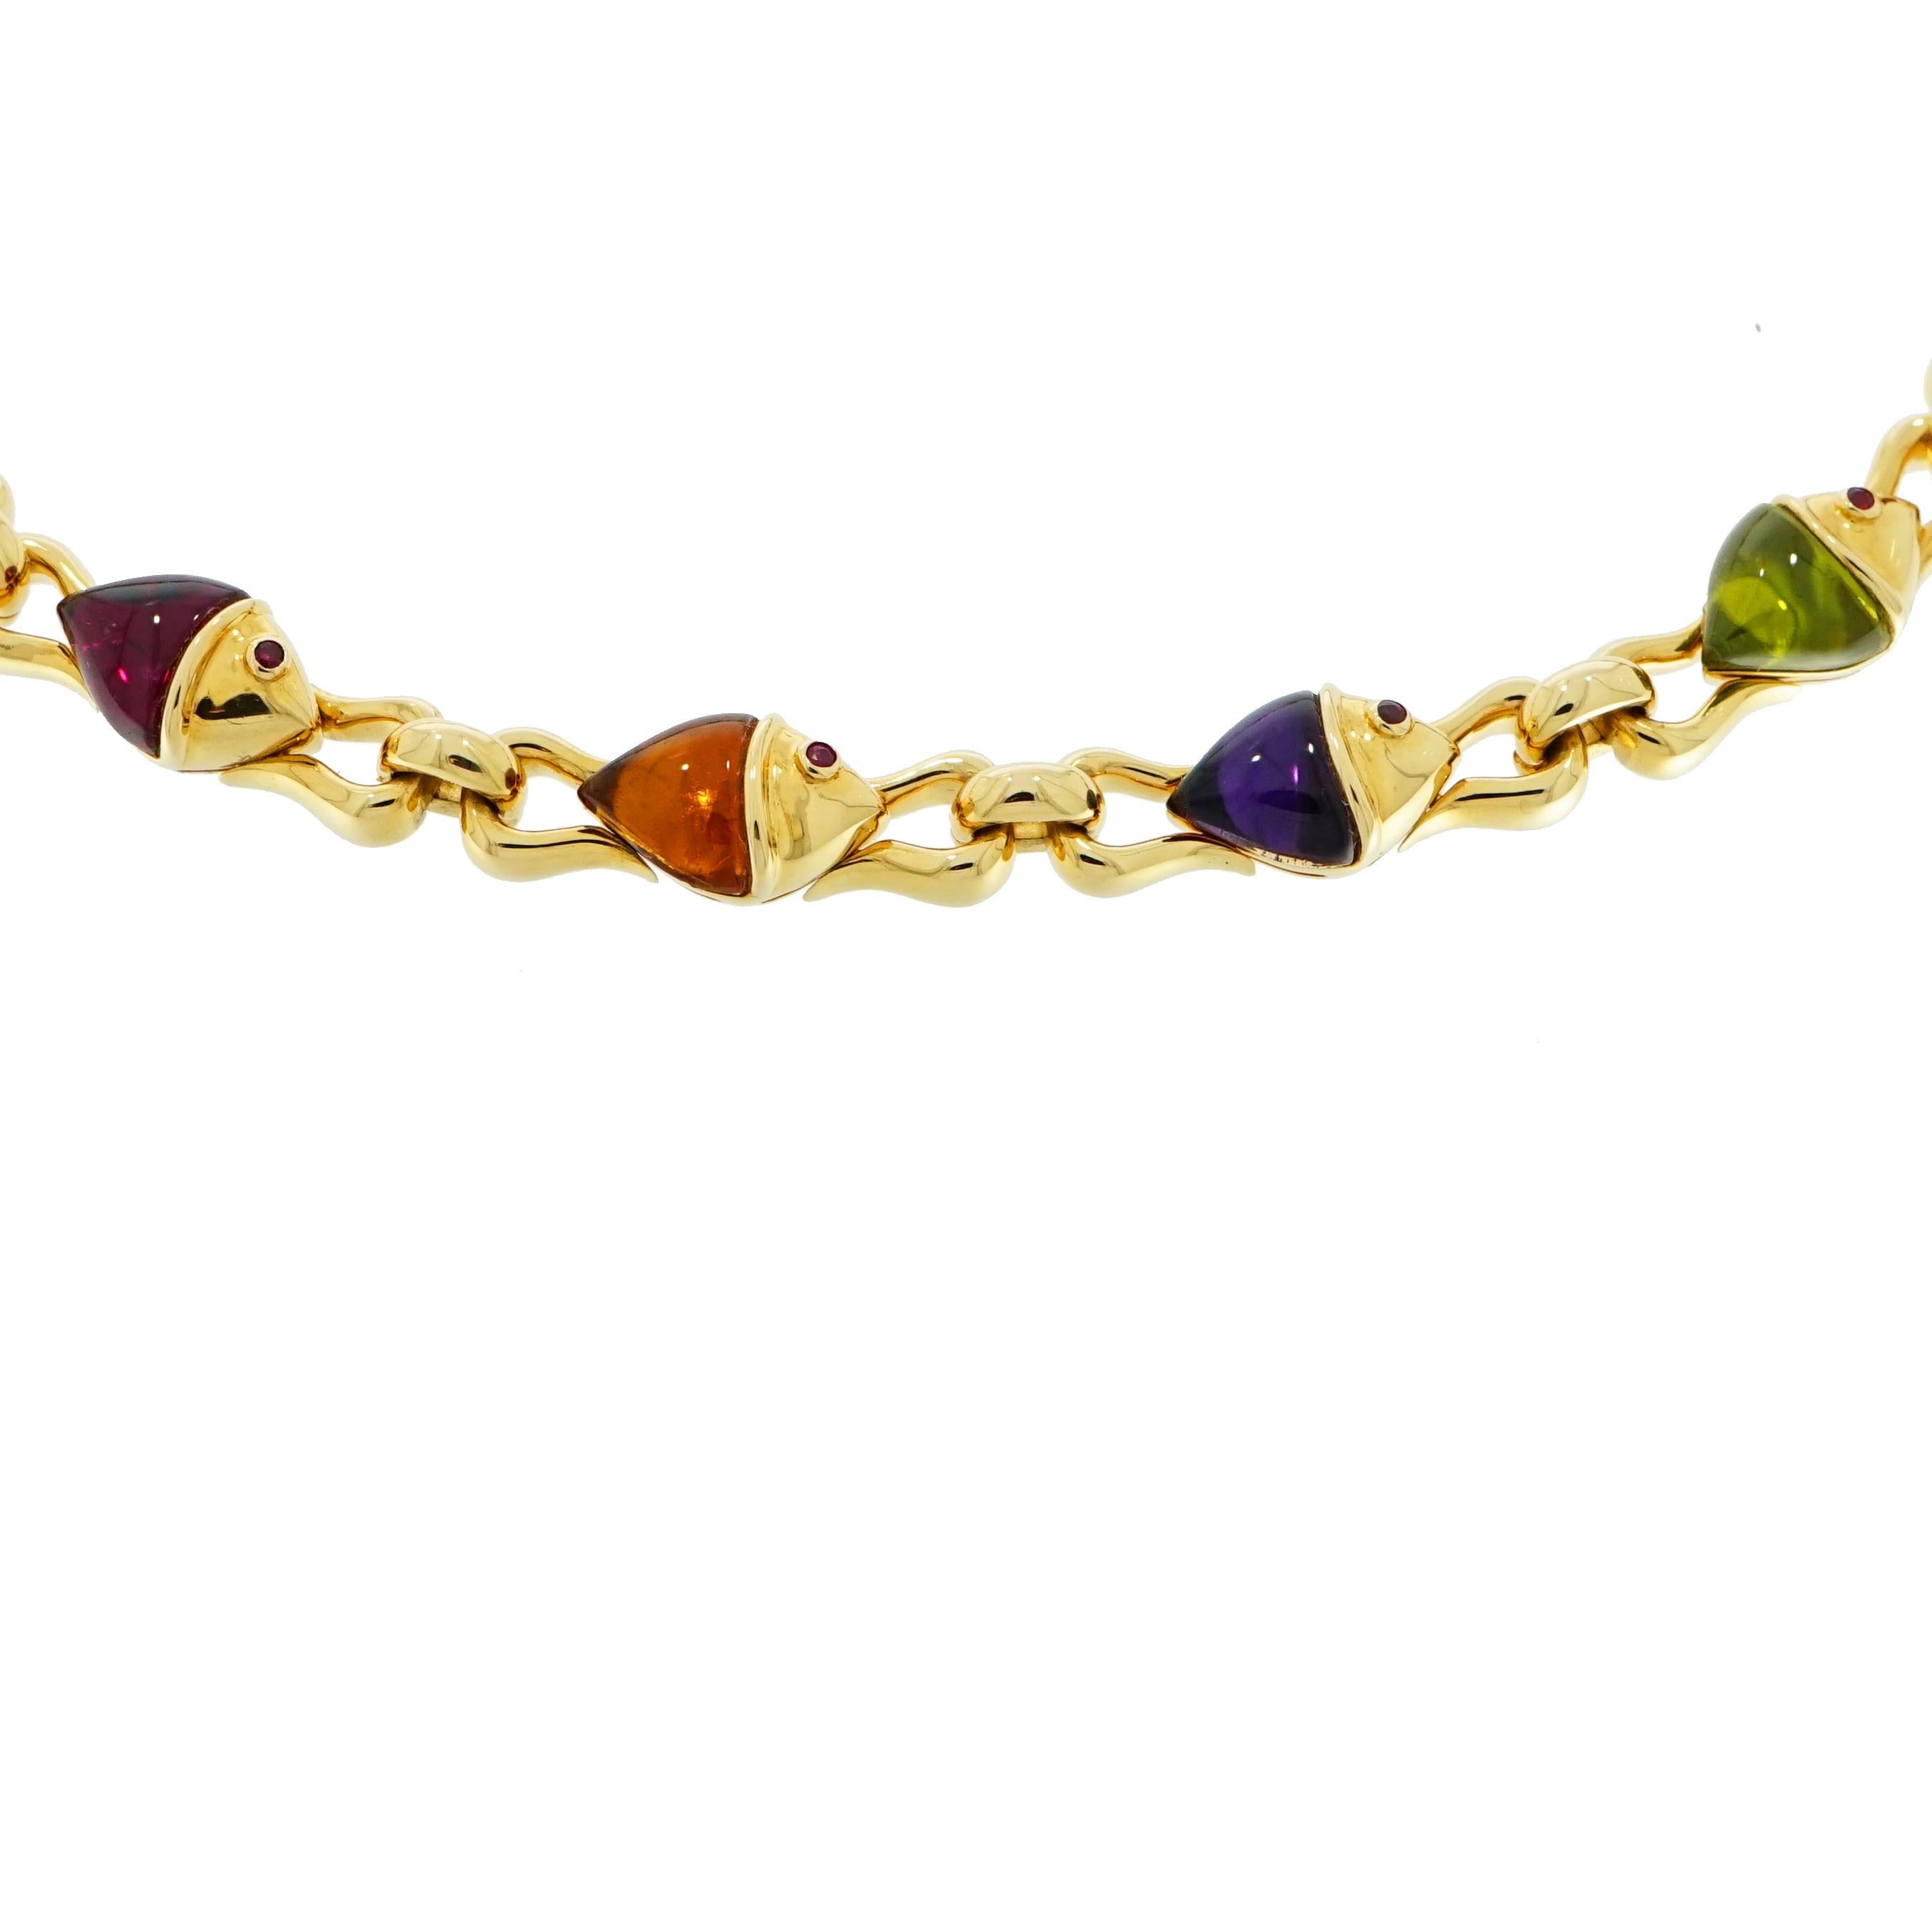 This previously loved necklace is from Bvlgari's signature Naturalia collection. A gorgeous necklace that features colorful fish design. 
Crafted in a high polished 18 karat yellow gold forming beautiful rounded links connecting seamlessly each fish